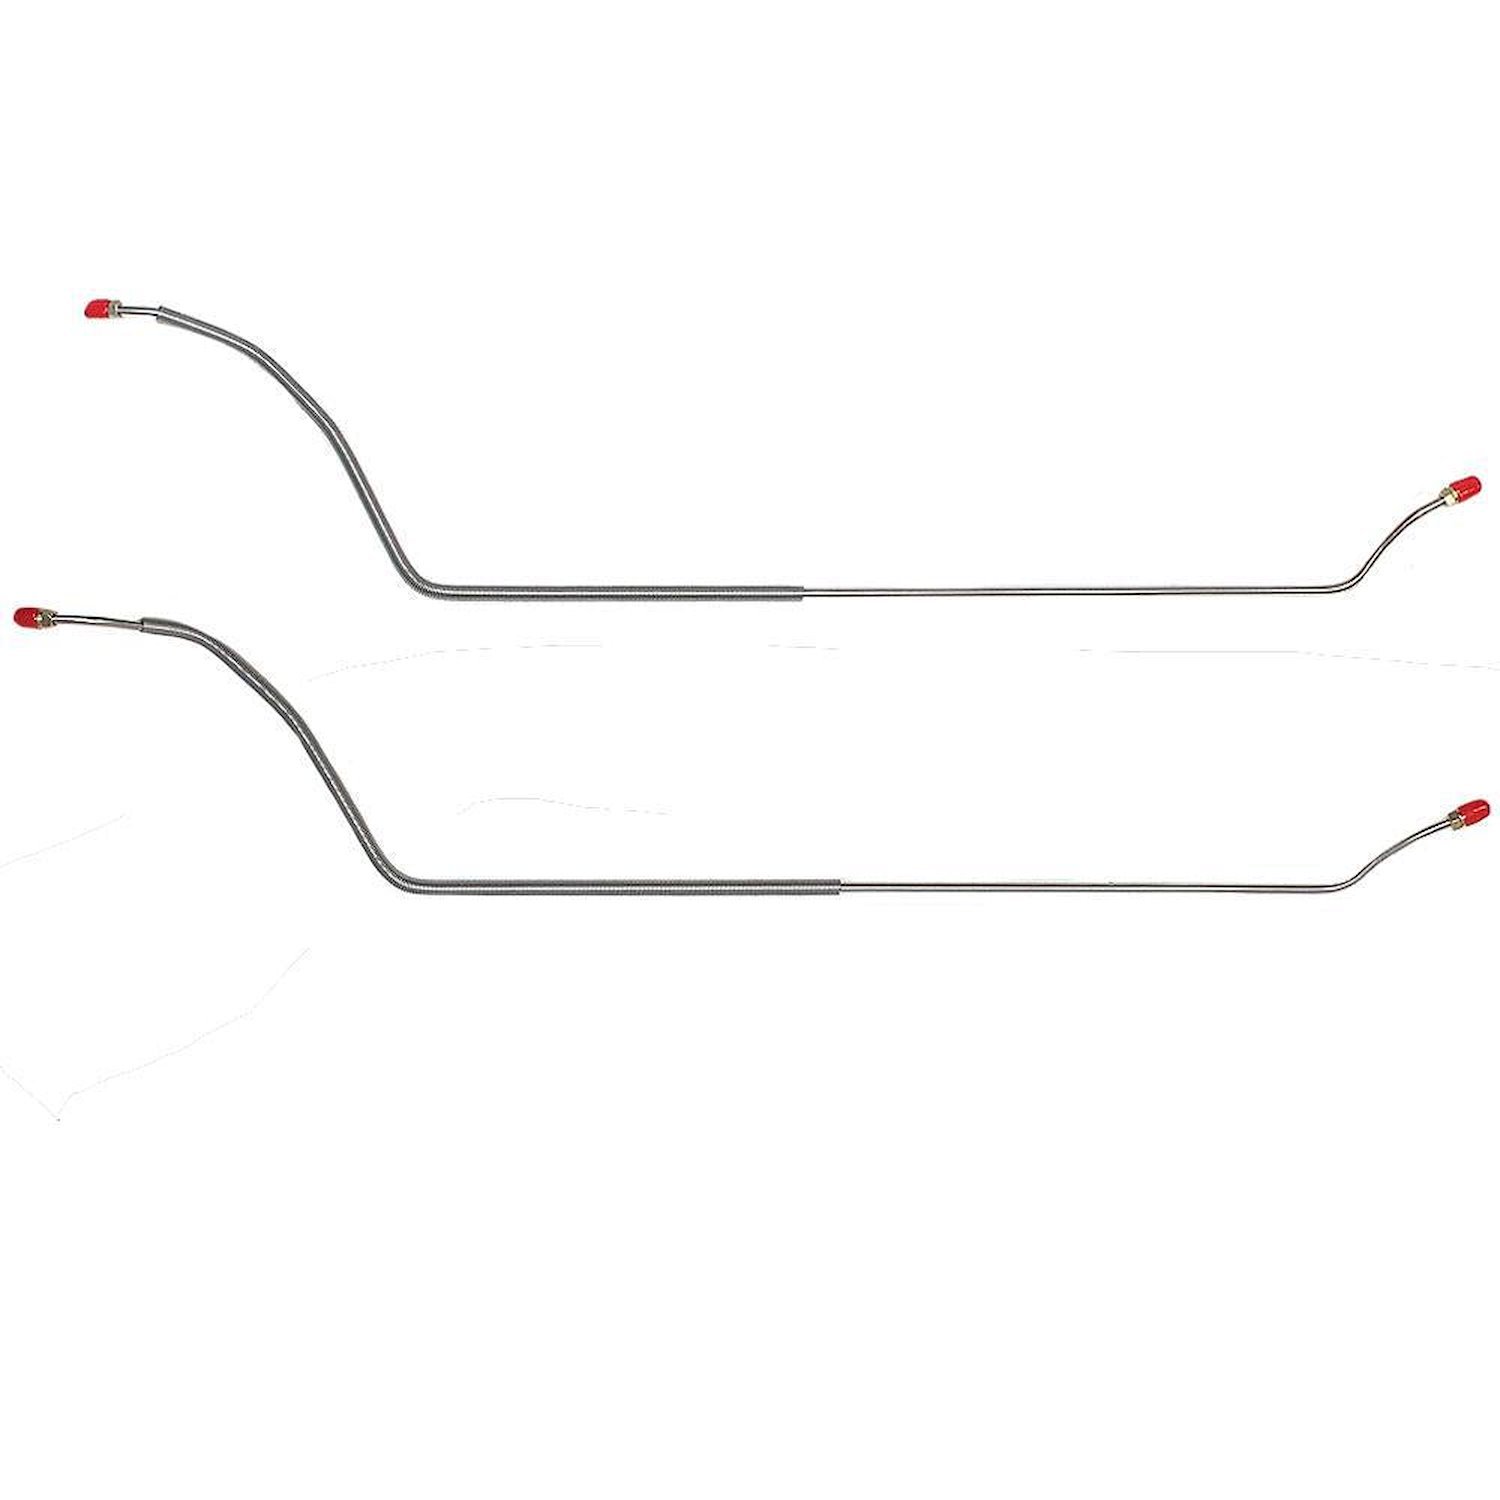 Rear Axle Brake Line for Select 1964-1967 Chevy